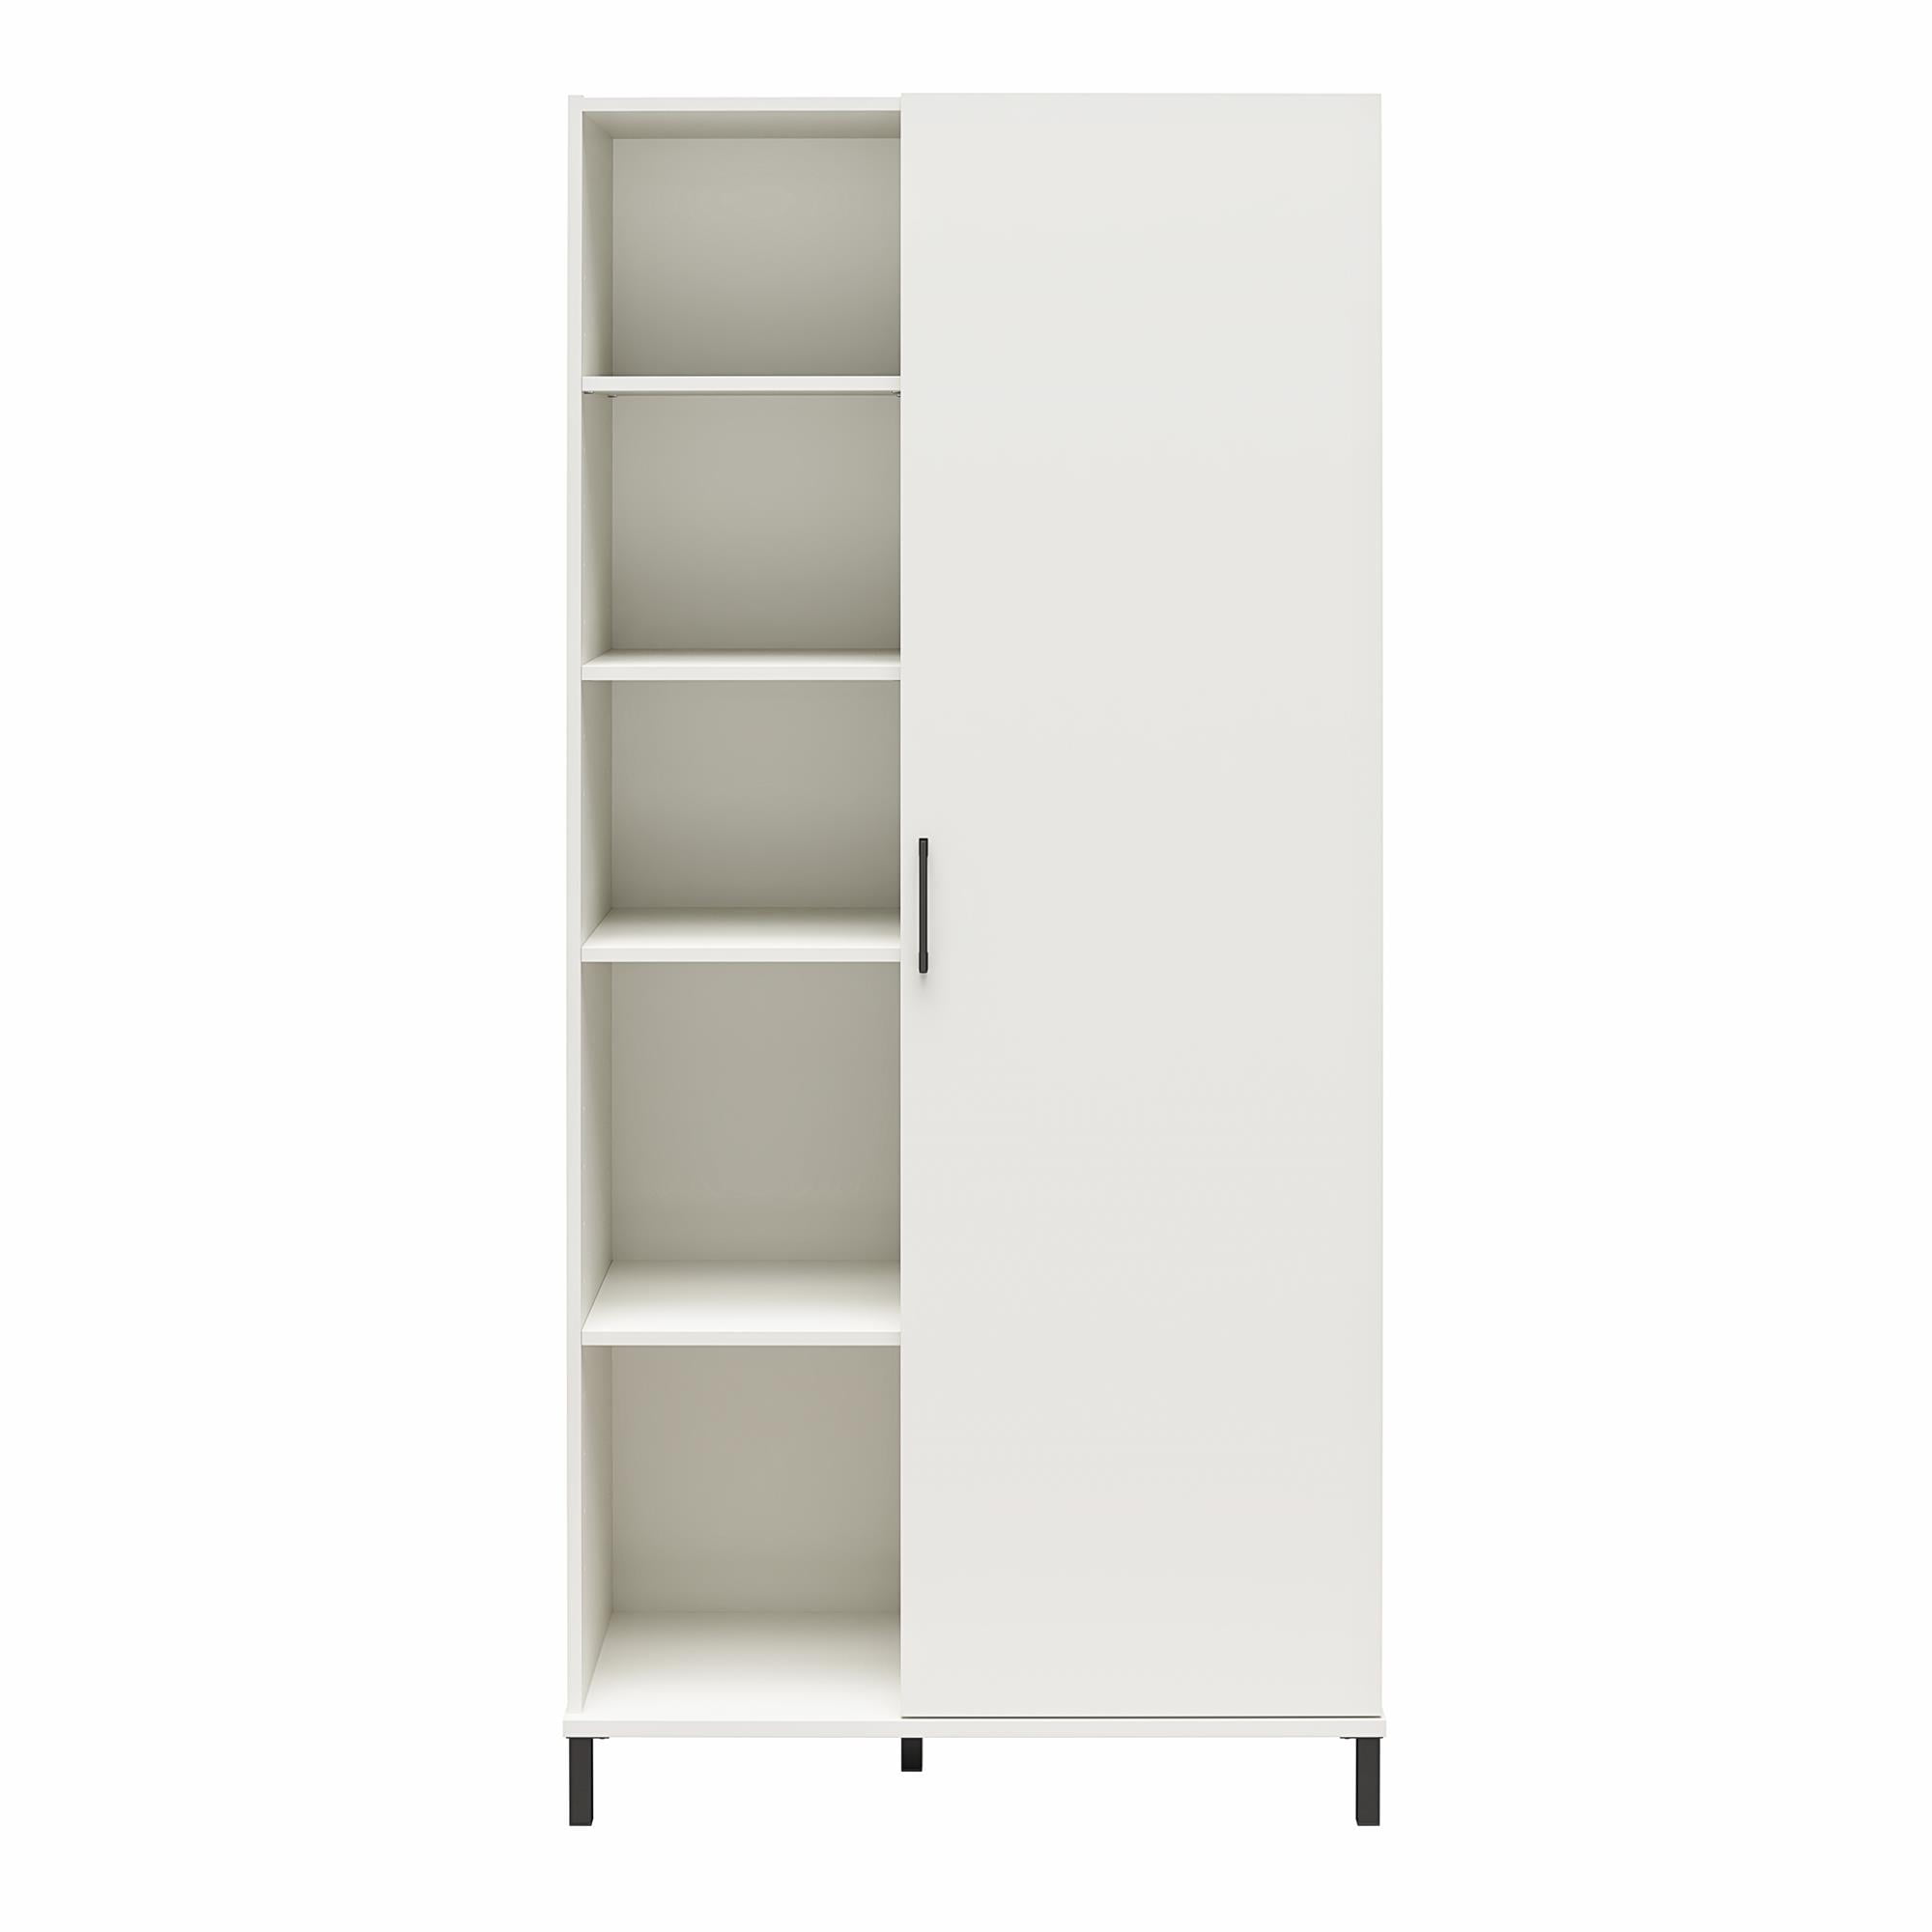 Versa Open Cabinet: Crafting Storage with Adjustable Shelving